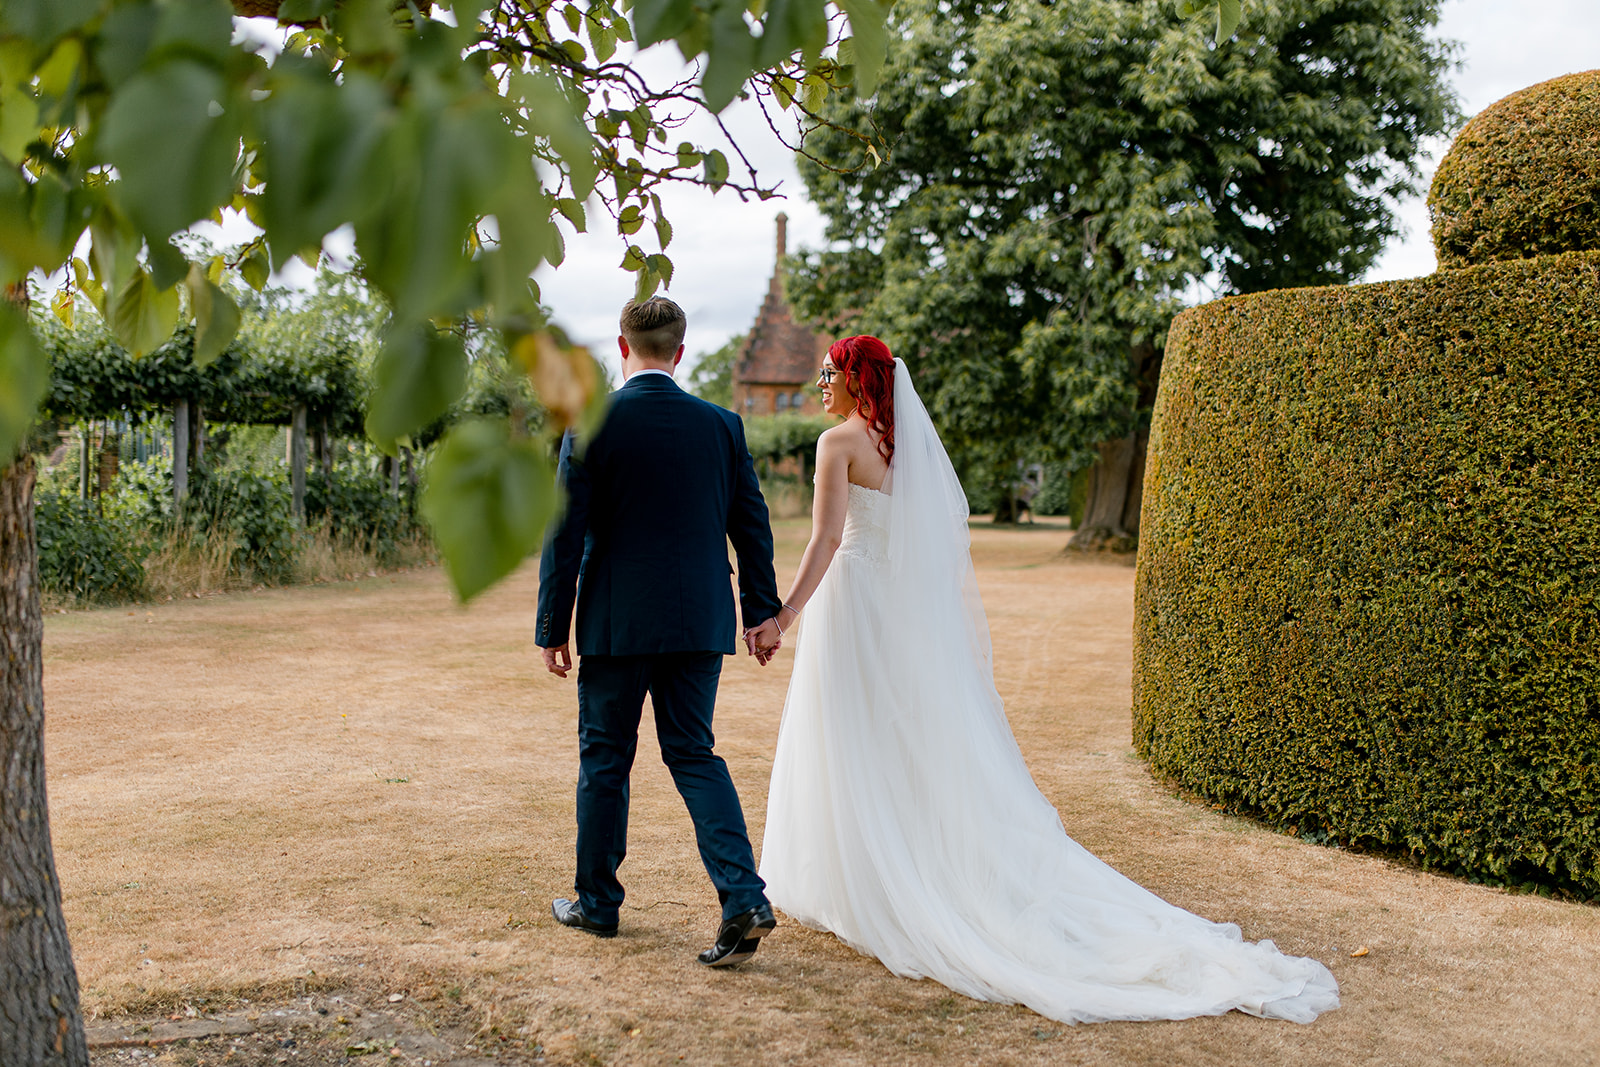 A couple who just got married, enjoy a walk around the gardens at Hatfield House